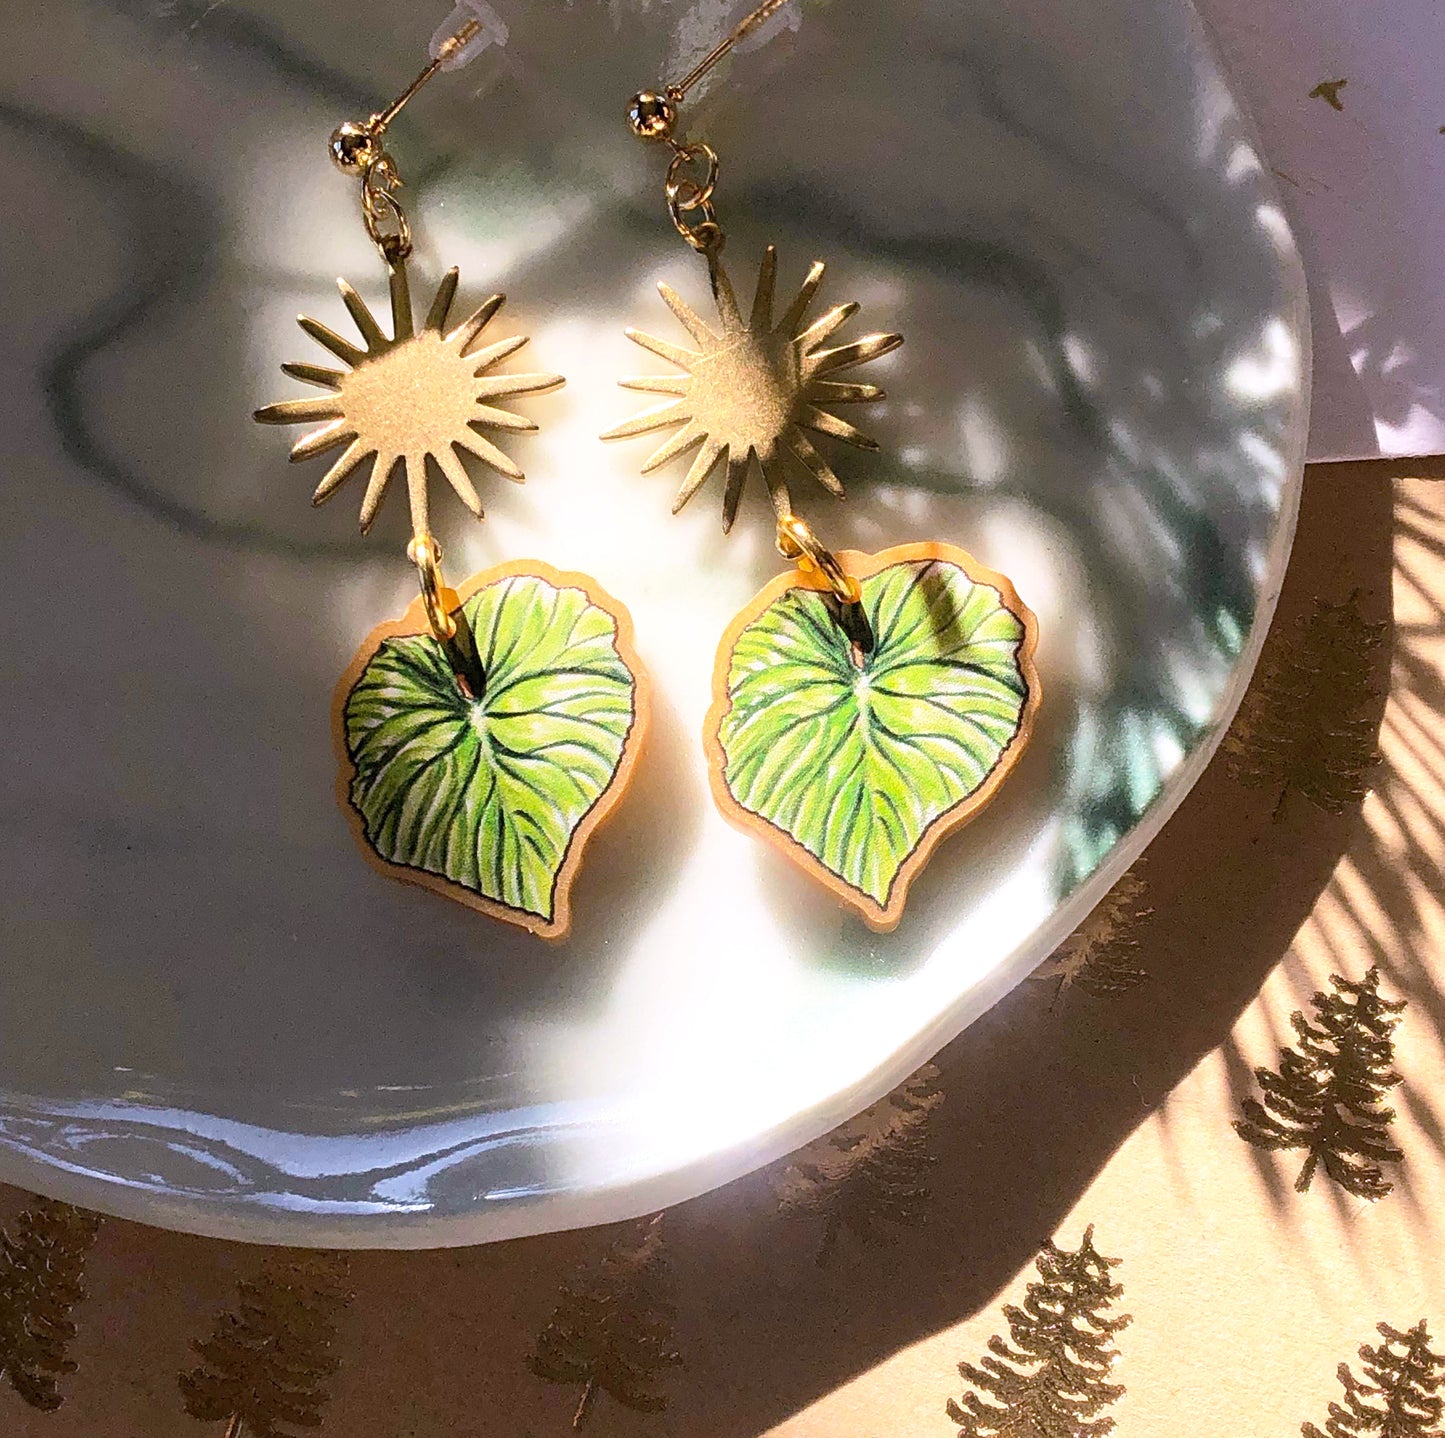 Golden Hour In March Limited Edition Earrings